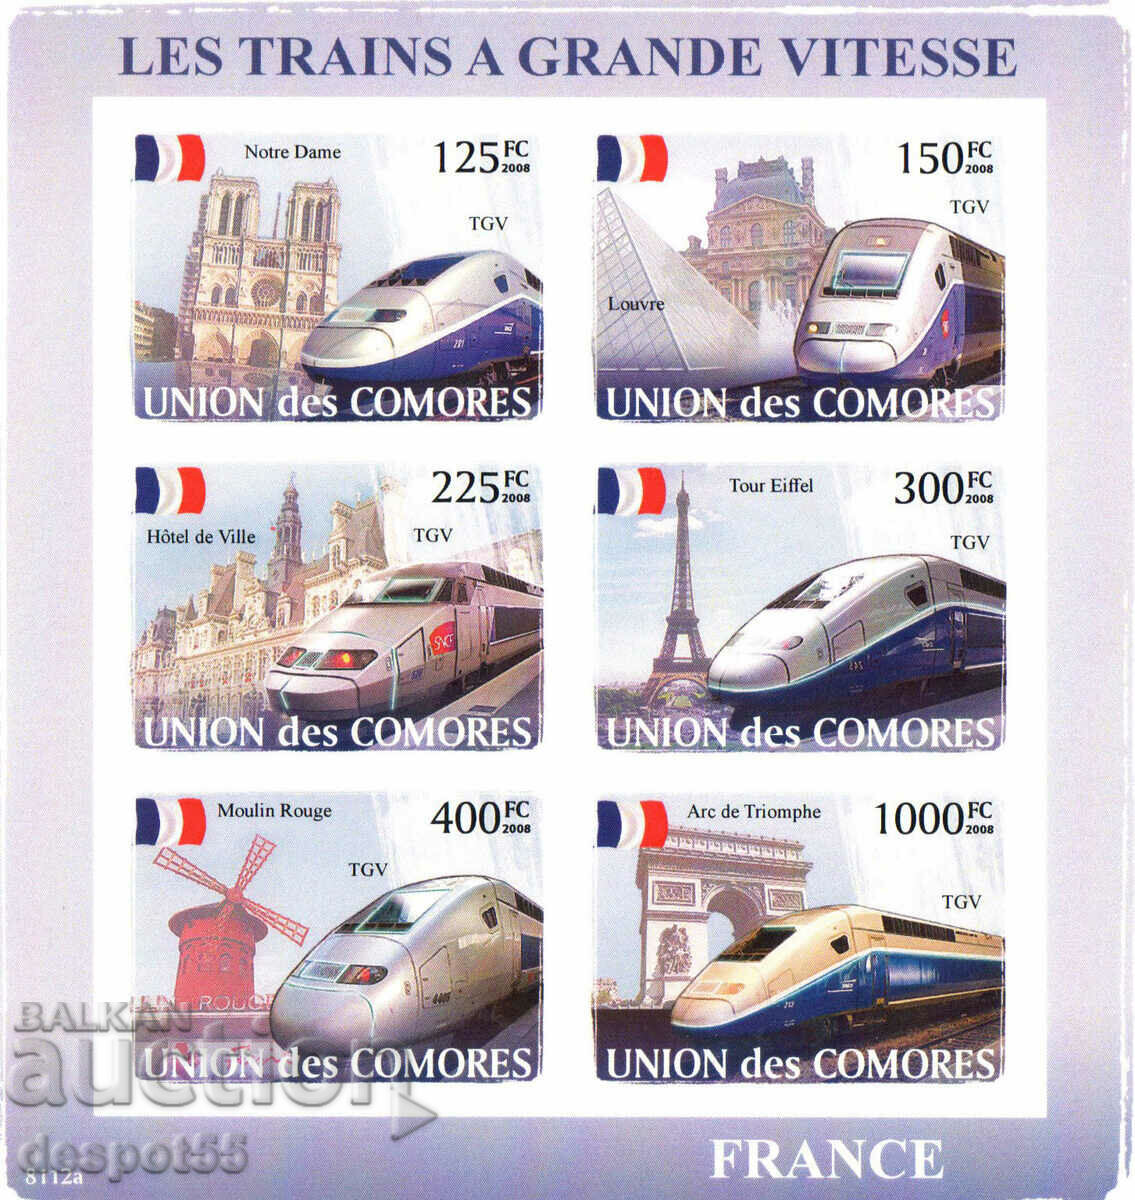 2008 Comoros Islands. Transport - express trains from all over the world